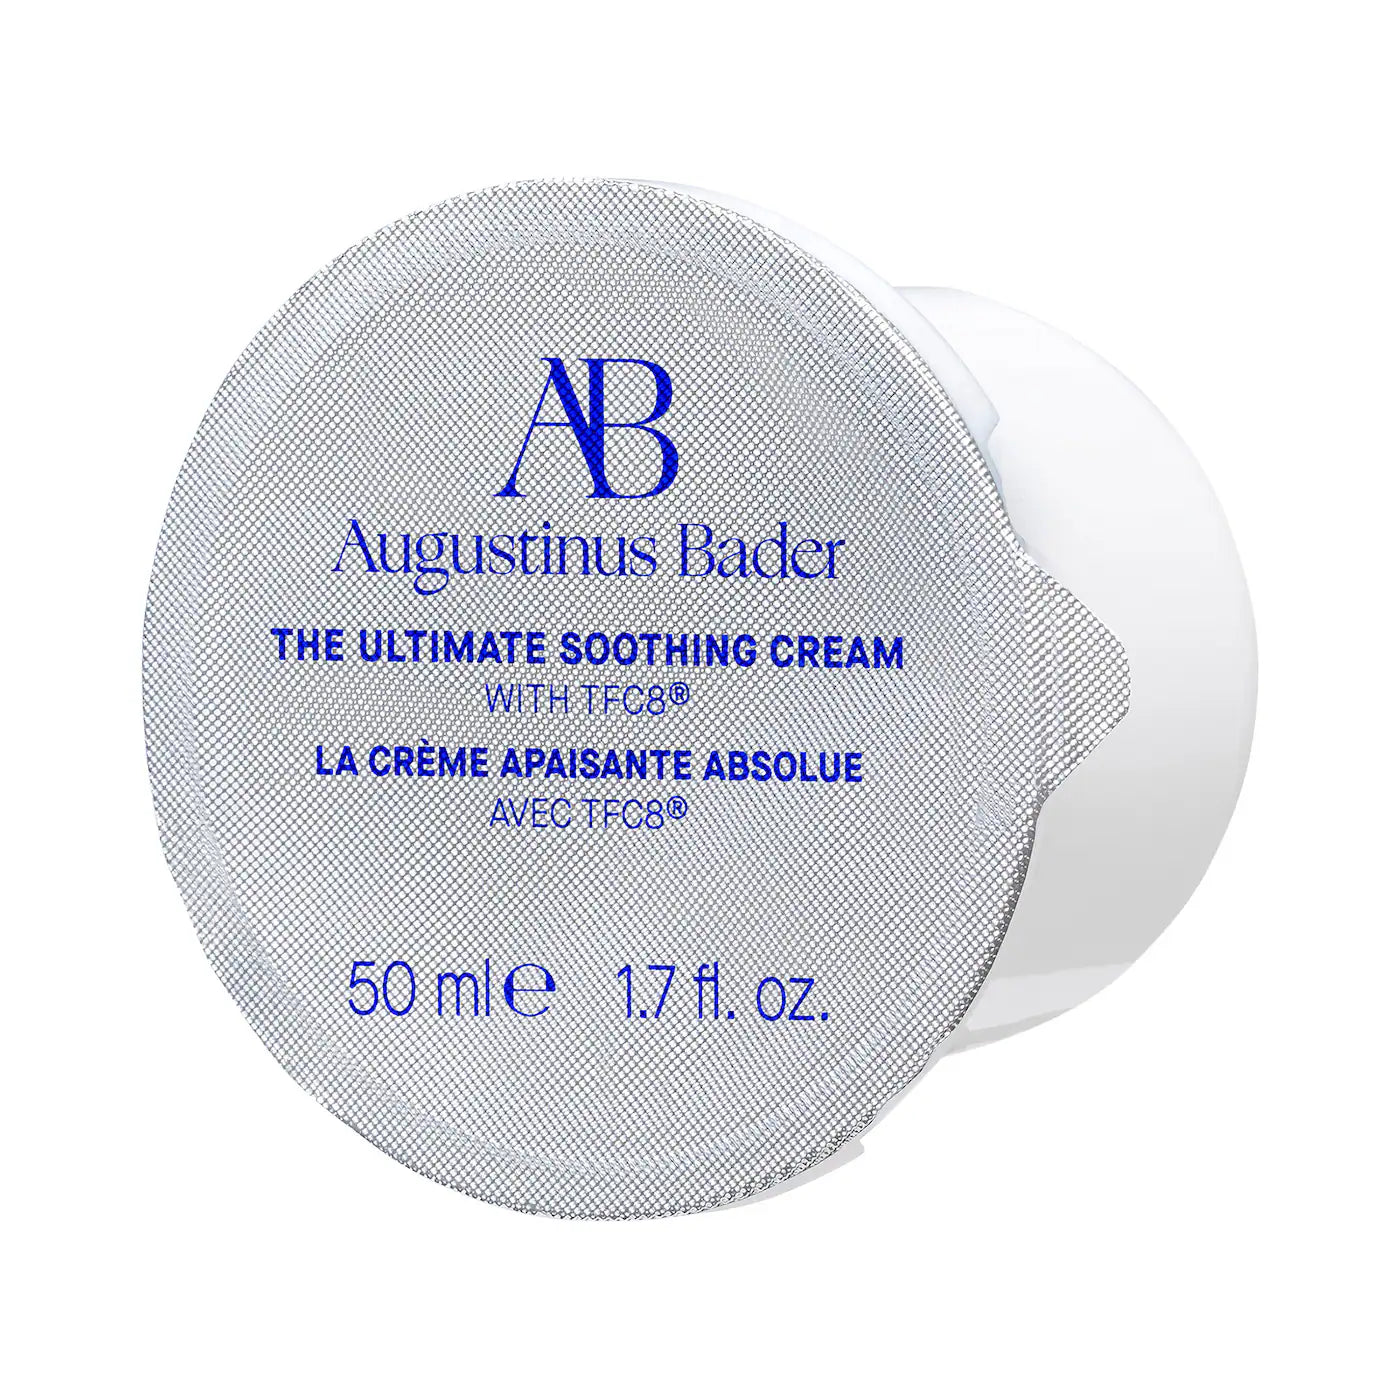 The Ultimate Soothing Cream